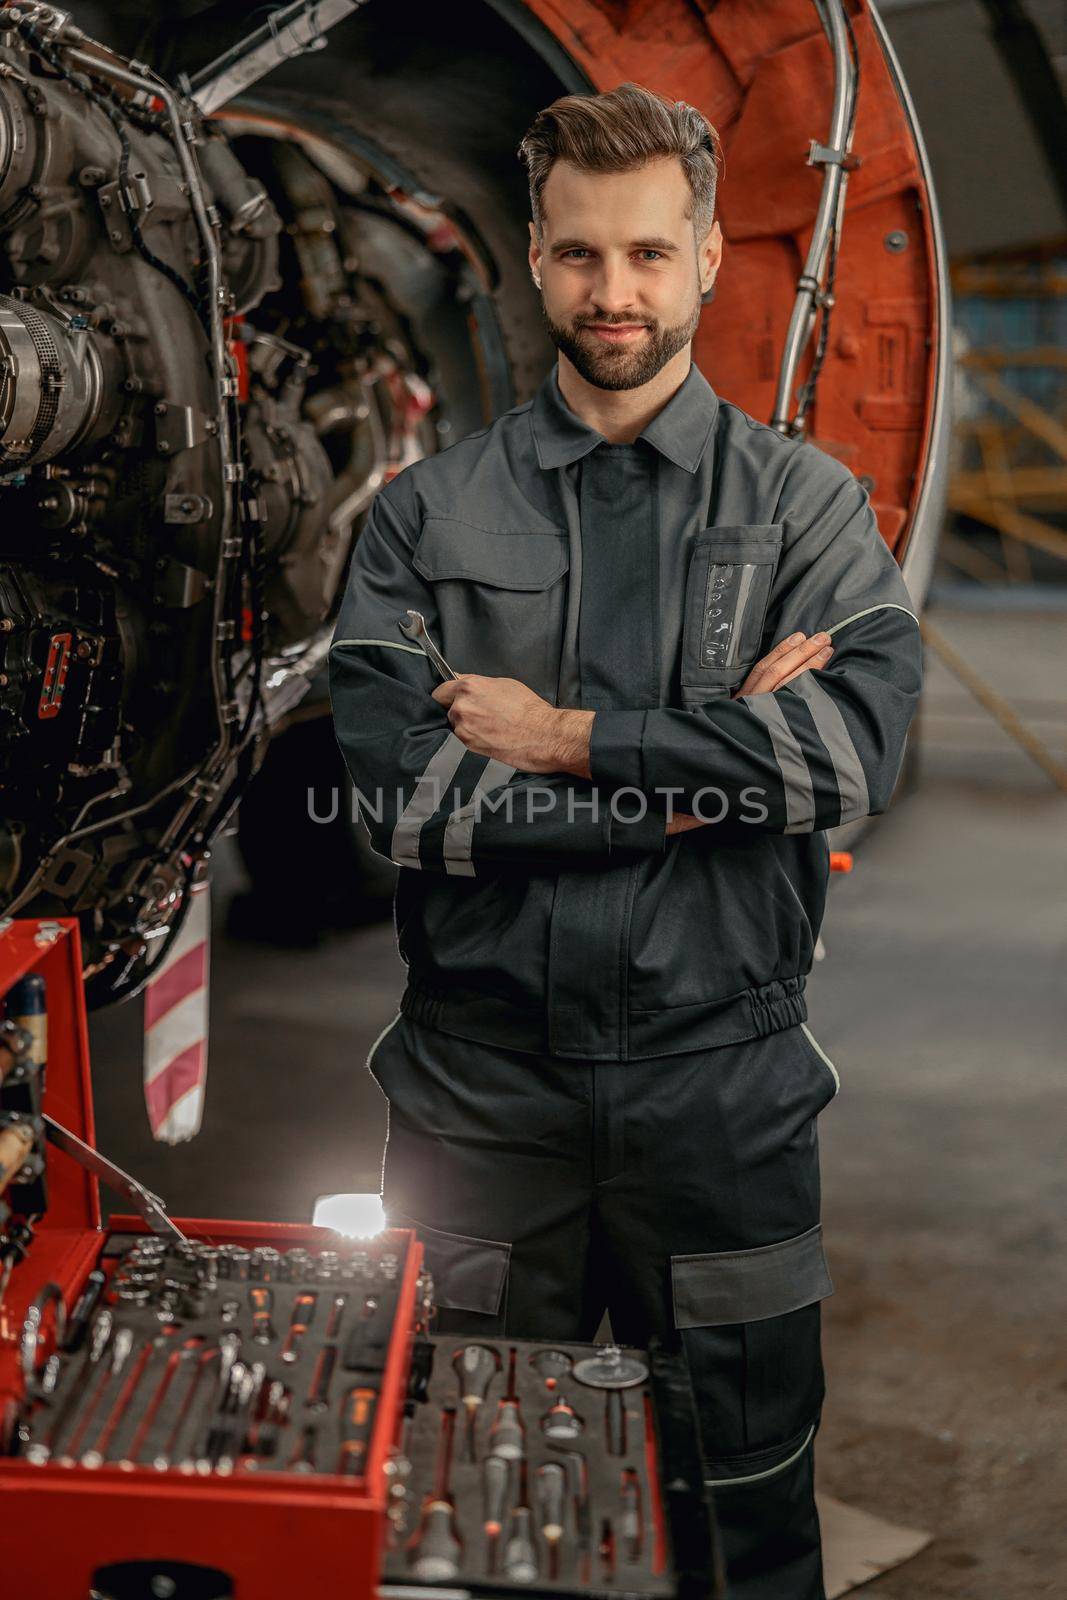 Bearded man aviation maintenance technician holding wrench and smiling while standing near airplane at repair station